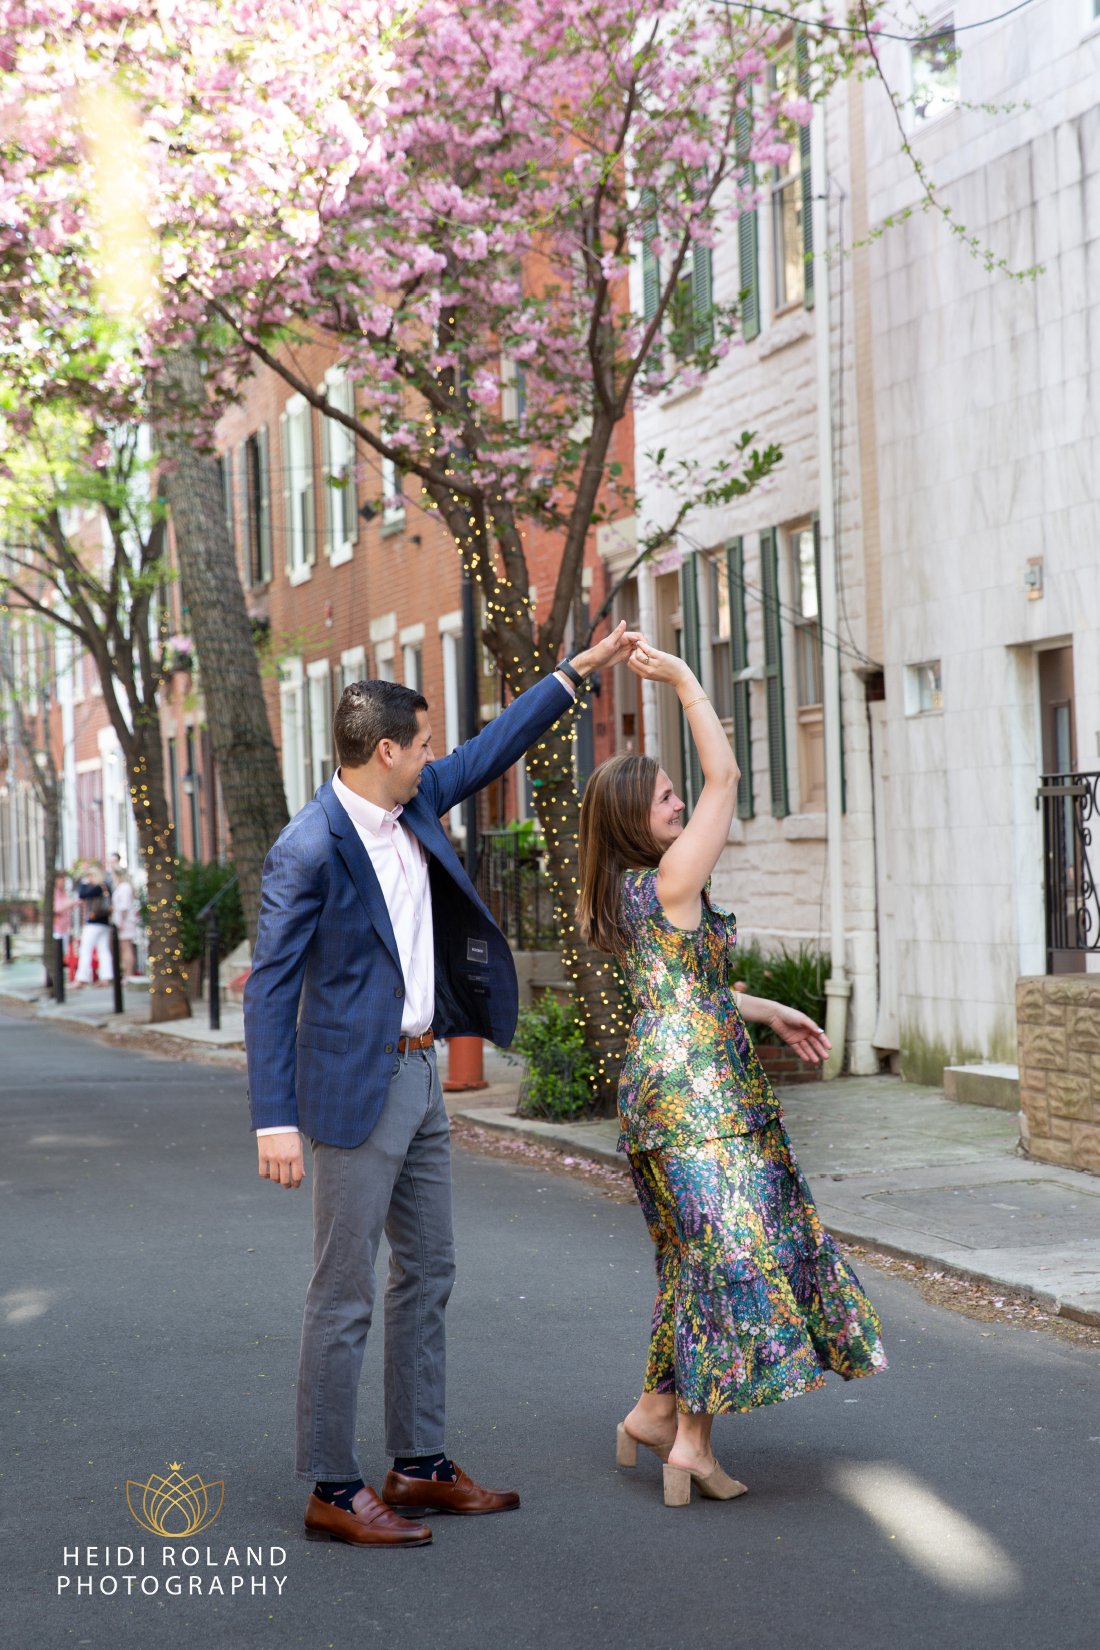 Man twirling woman on philadelphia street in the spring after proposal